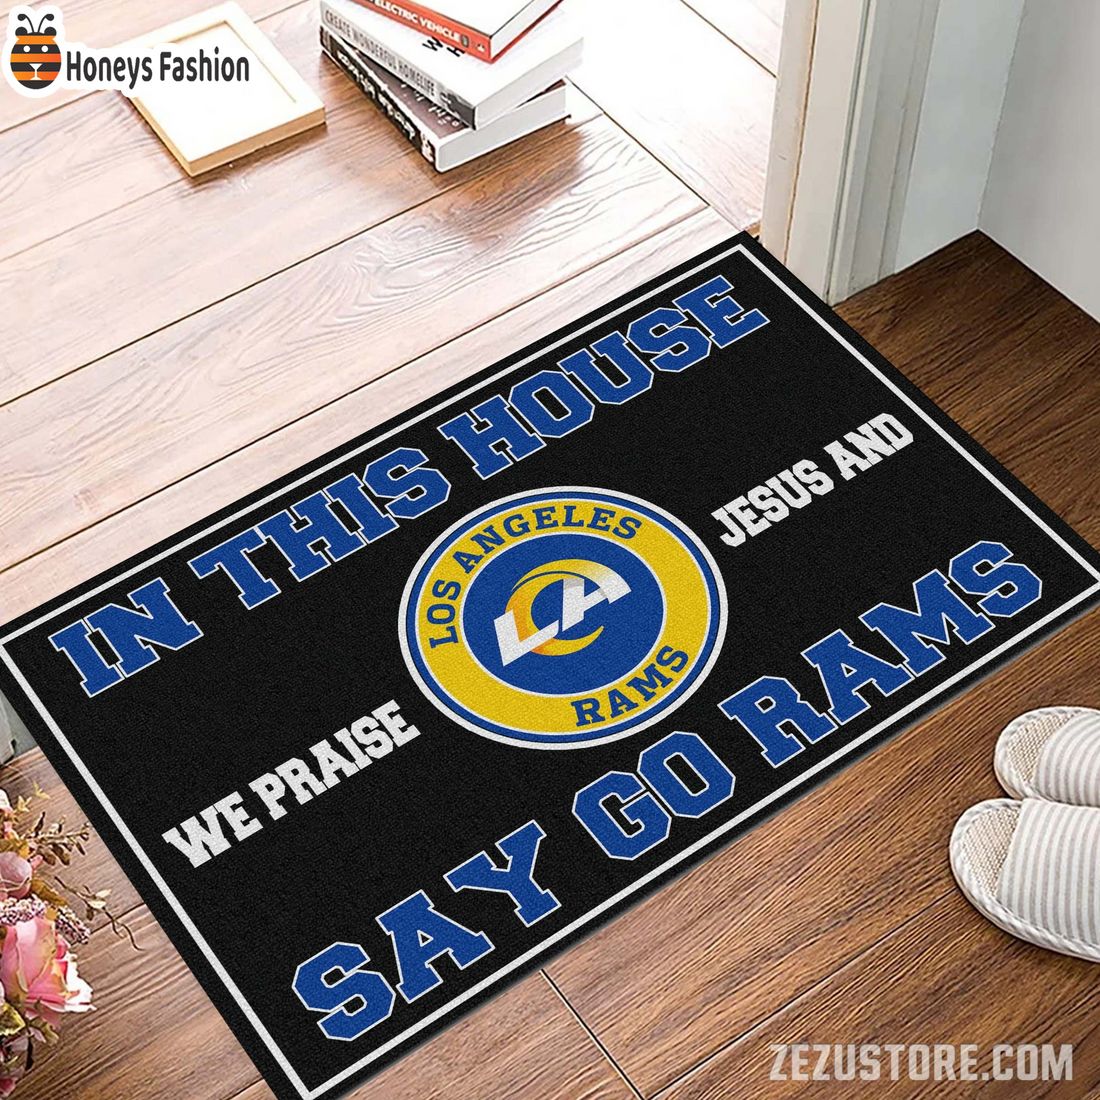 In this house we praise jesus and say go Rams doormat